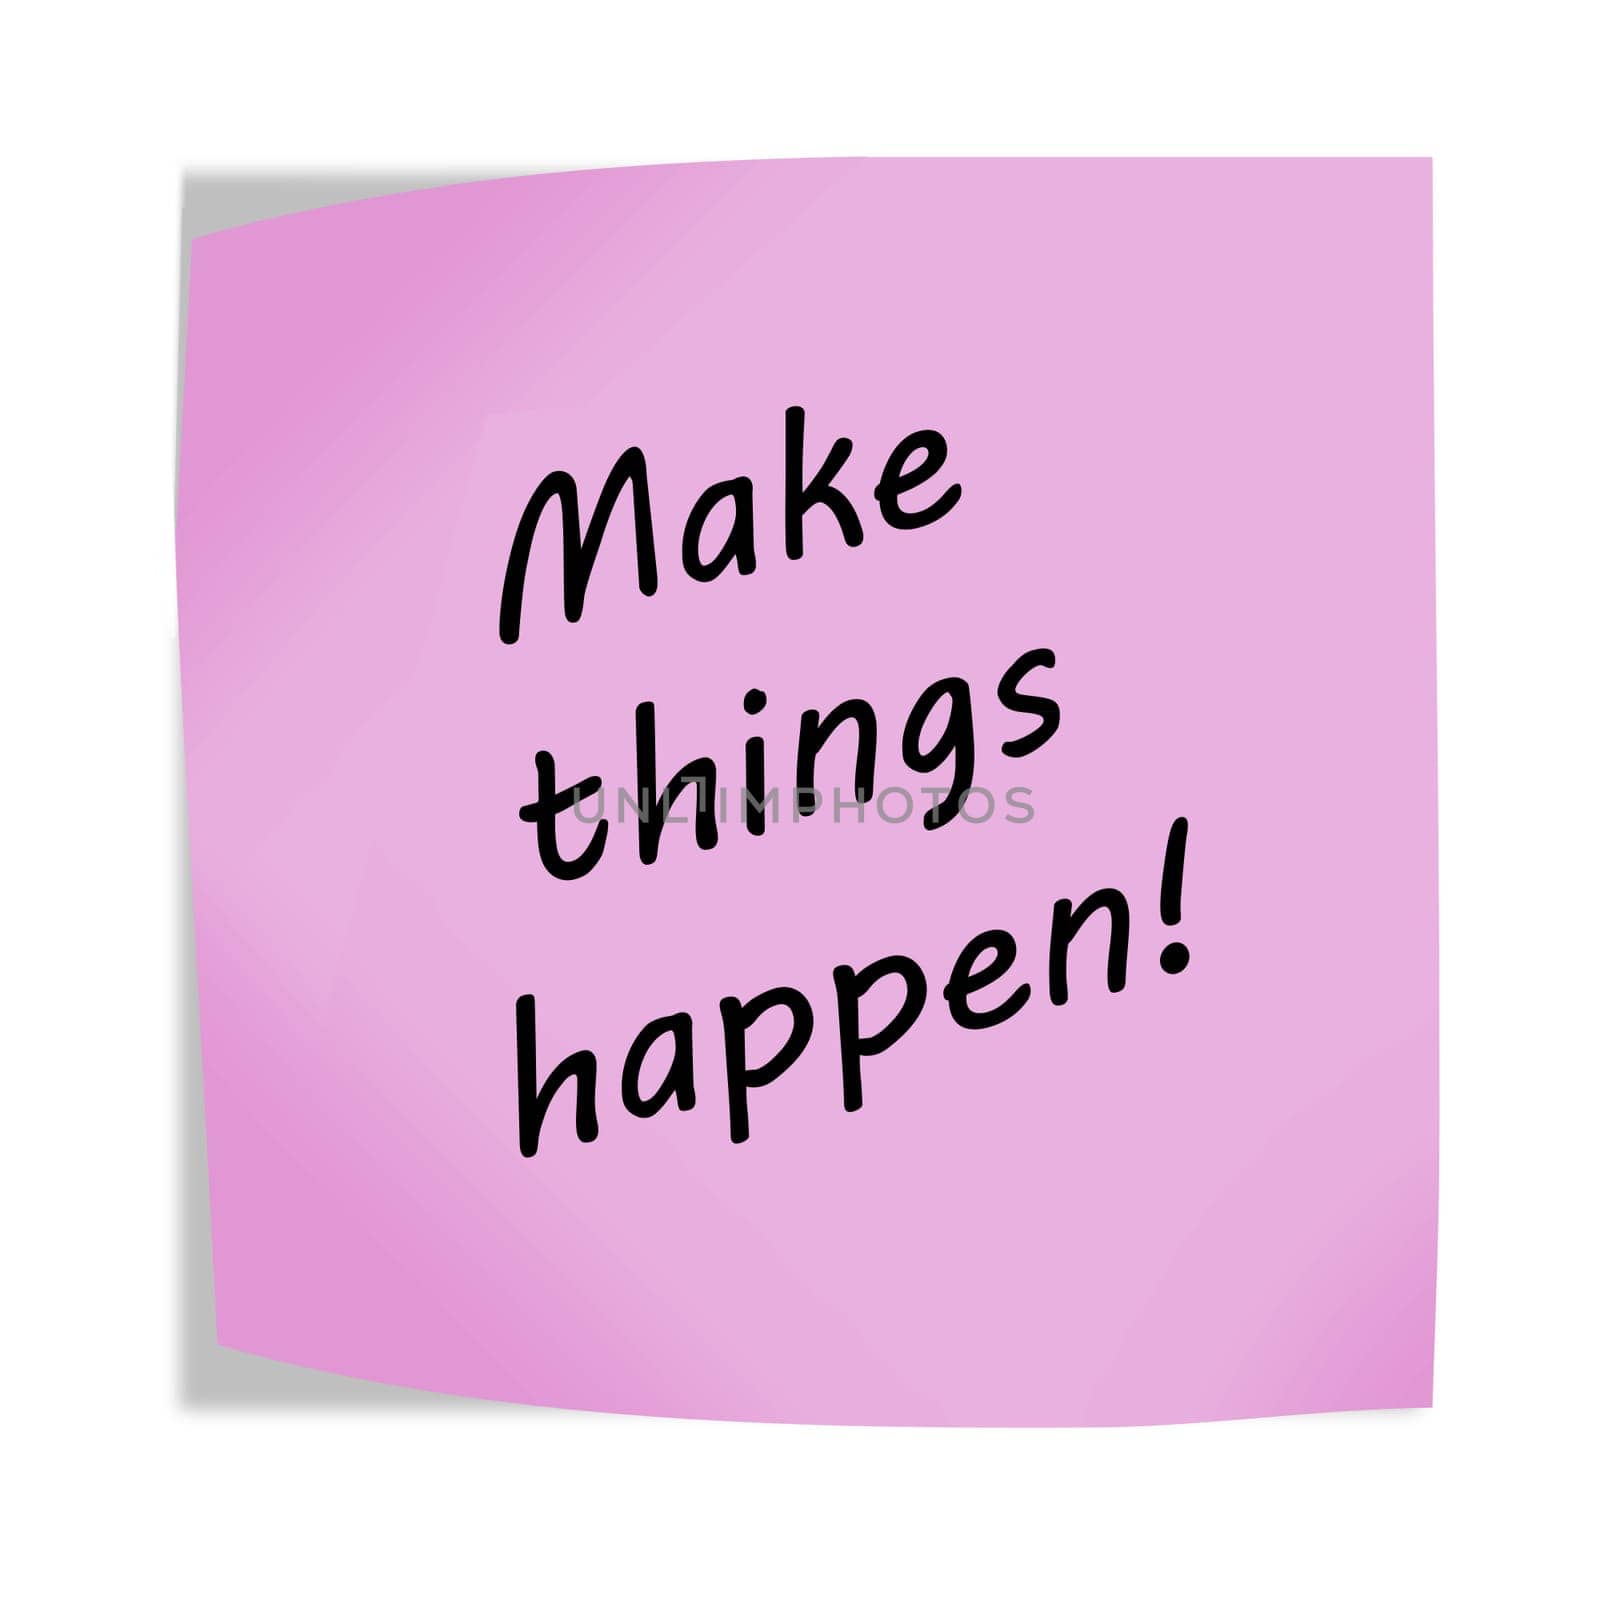 Make things happen 3d illustration post note reminder with clipping path by VivacityImages